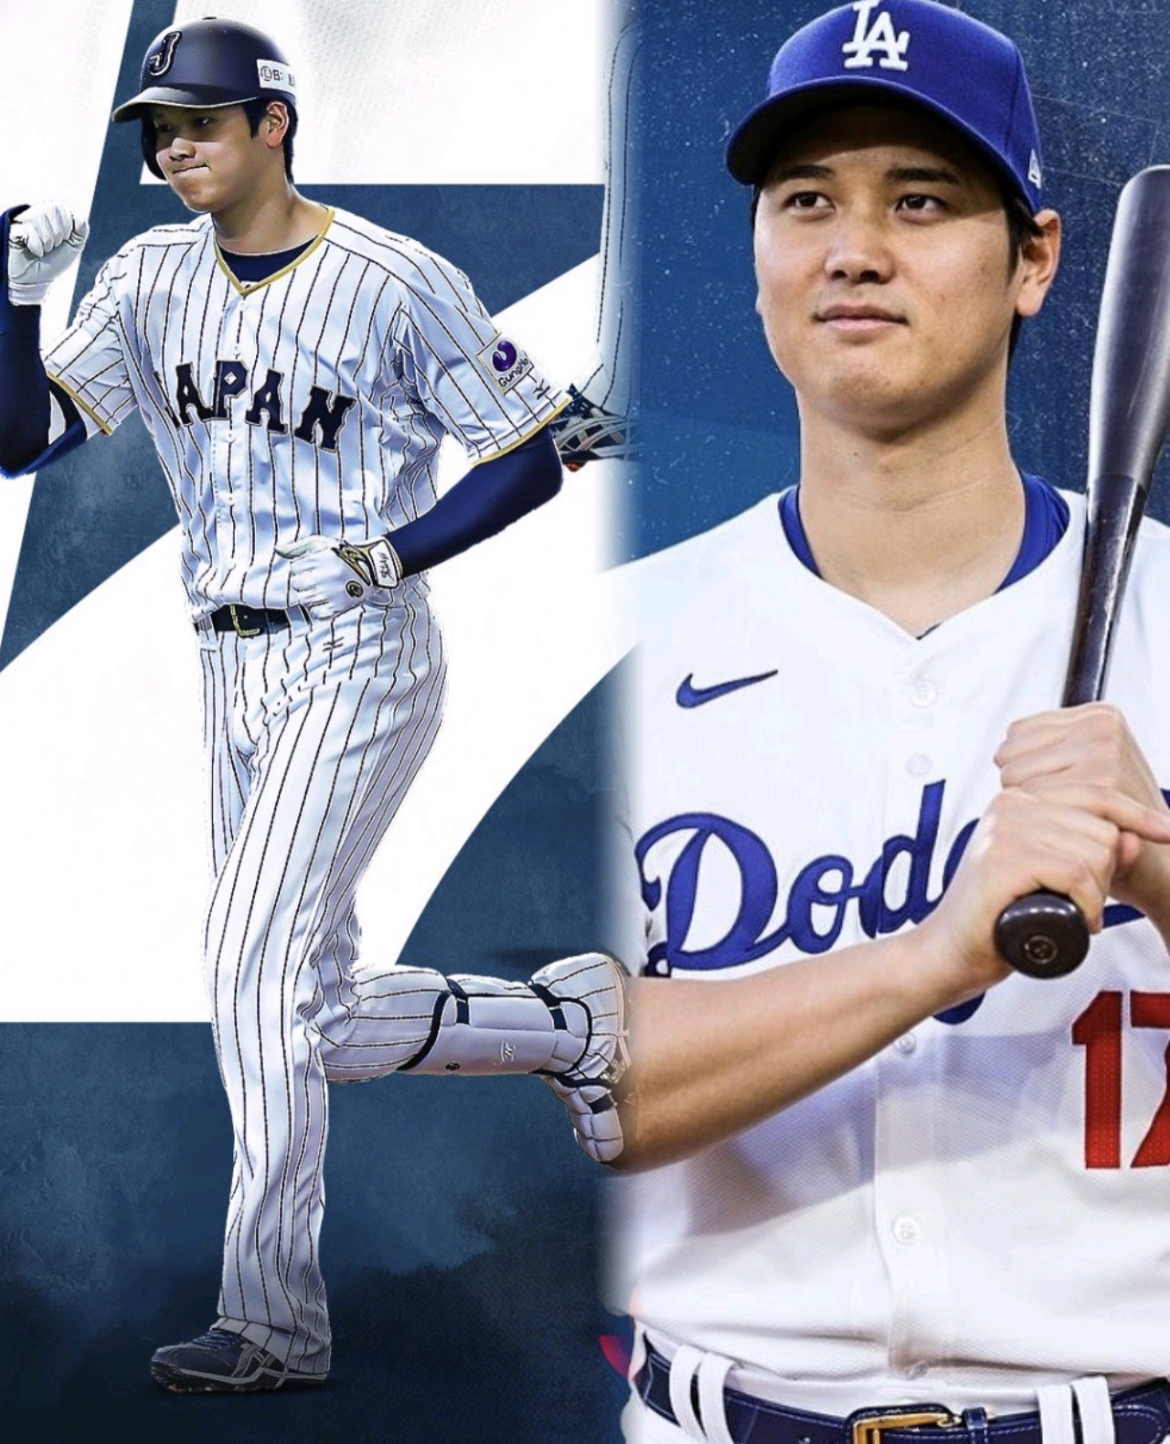 Shohei Ohtani and the Dodgers Are Donating to Help Those Affected by Japan New Years Earthquake